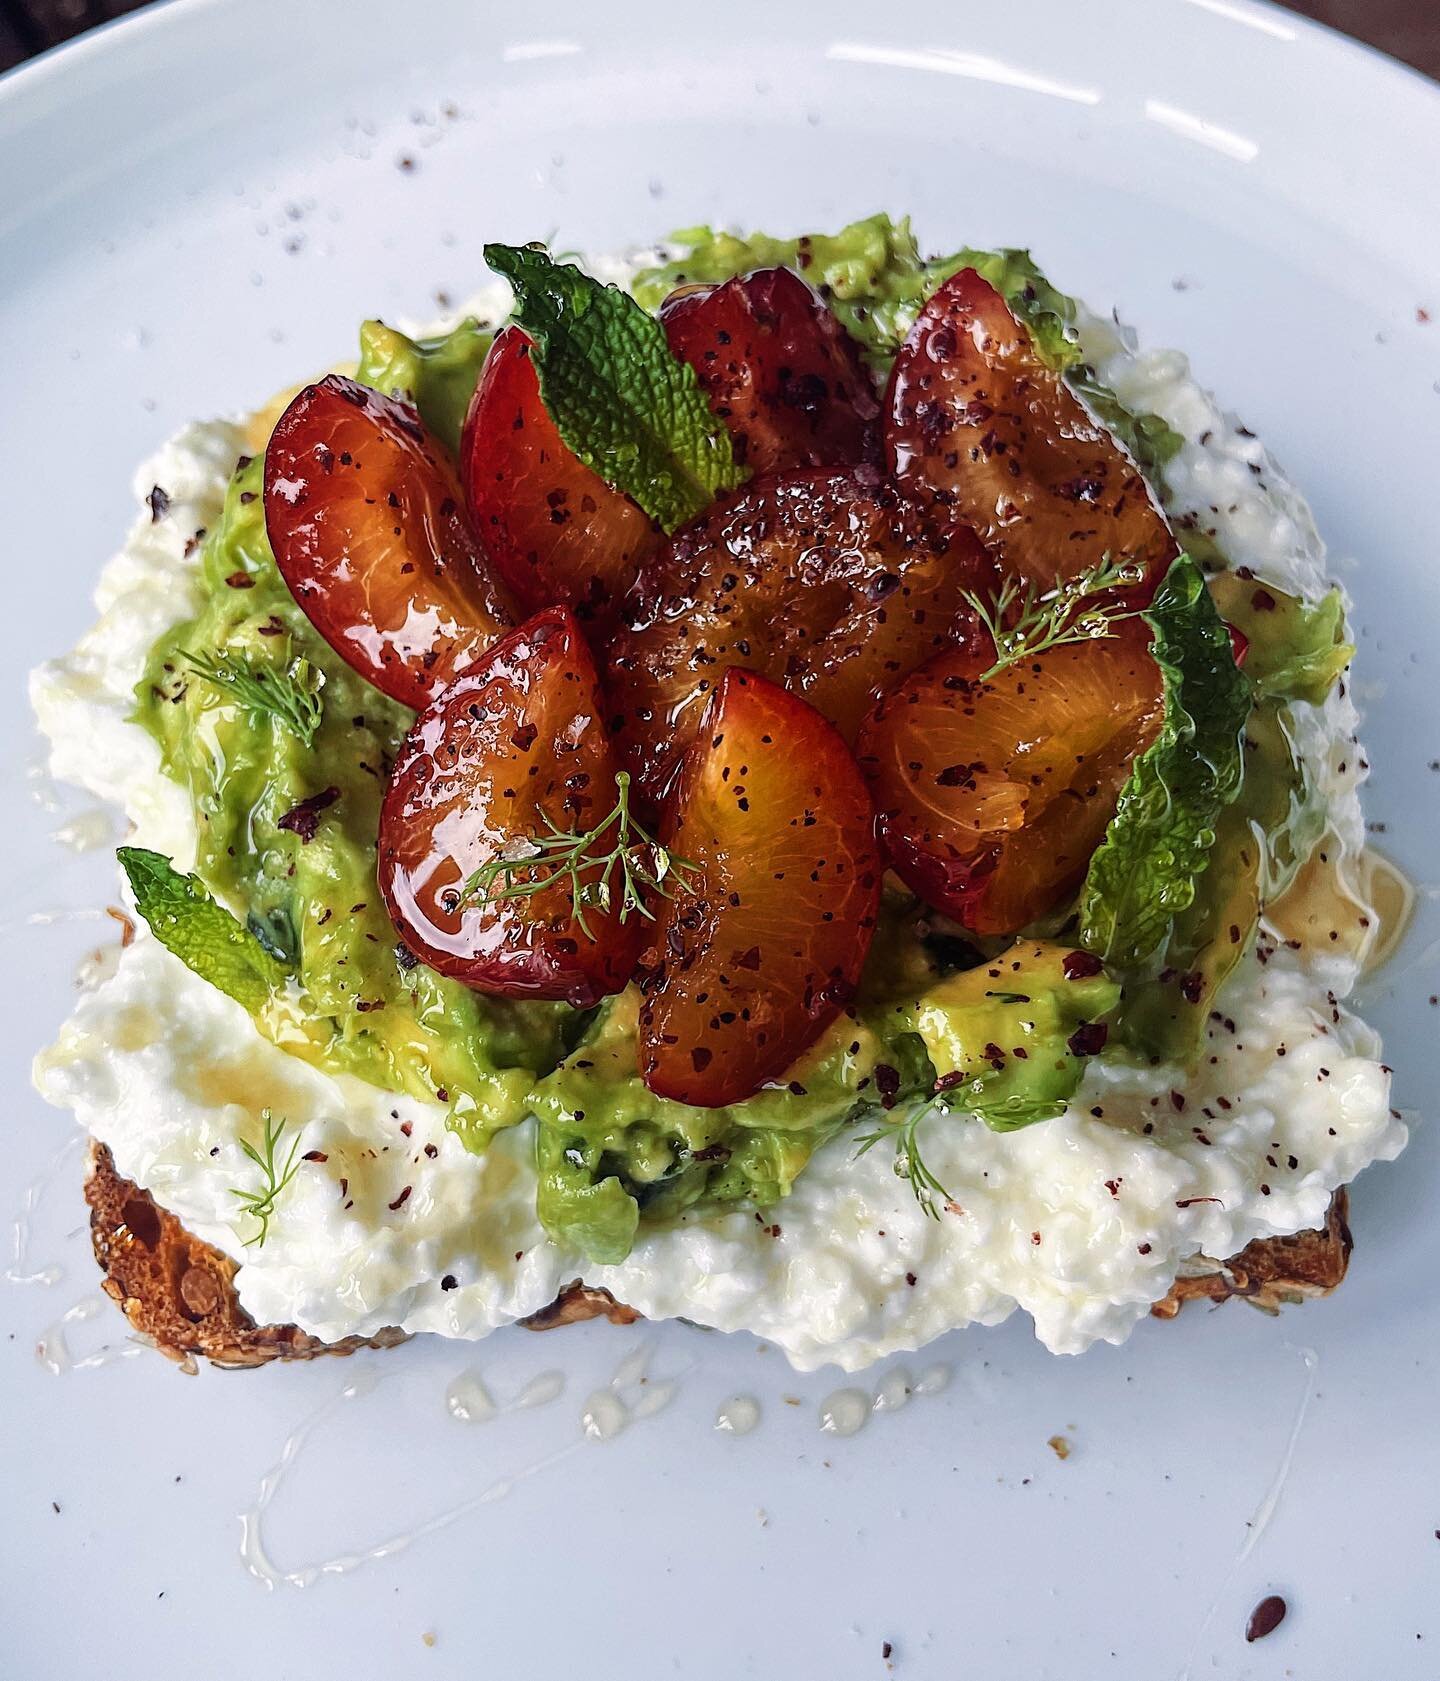 fruit 🤝 cottage cheese 

excellent on its own, but have you tried it on toast?? Here are a few of my favorite sweet &amp; savory combos 🥰

- plums &amp; avo with mint, sumac, &amp; honey 
- blueberries &amp; avo with dill, cracked pepper, balsamic 